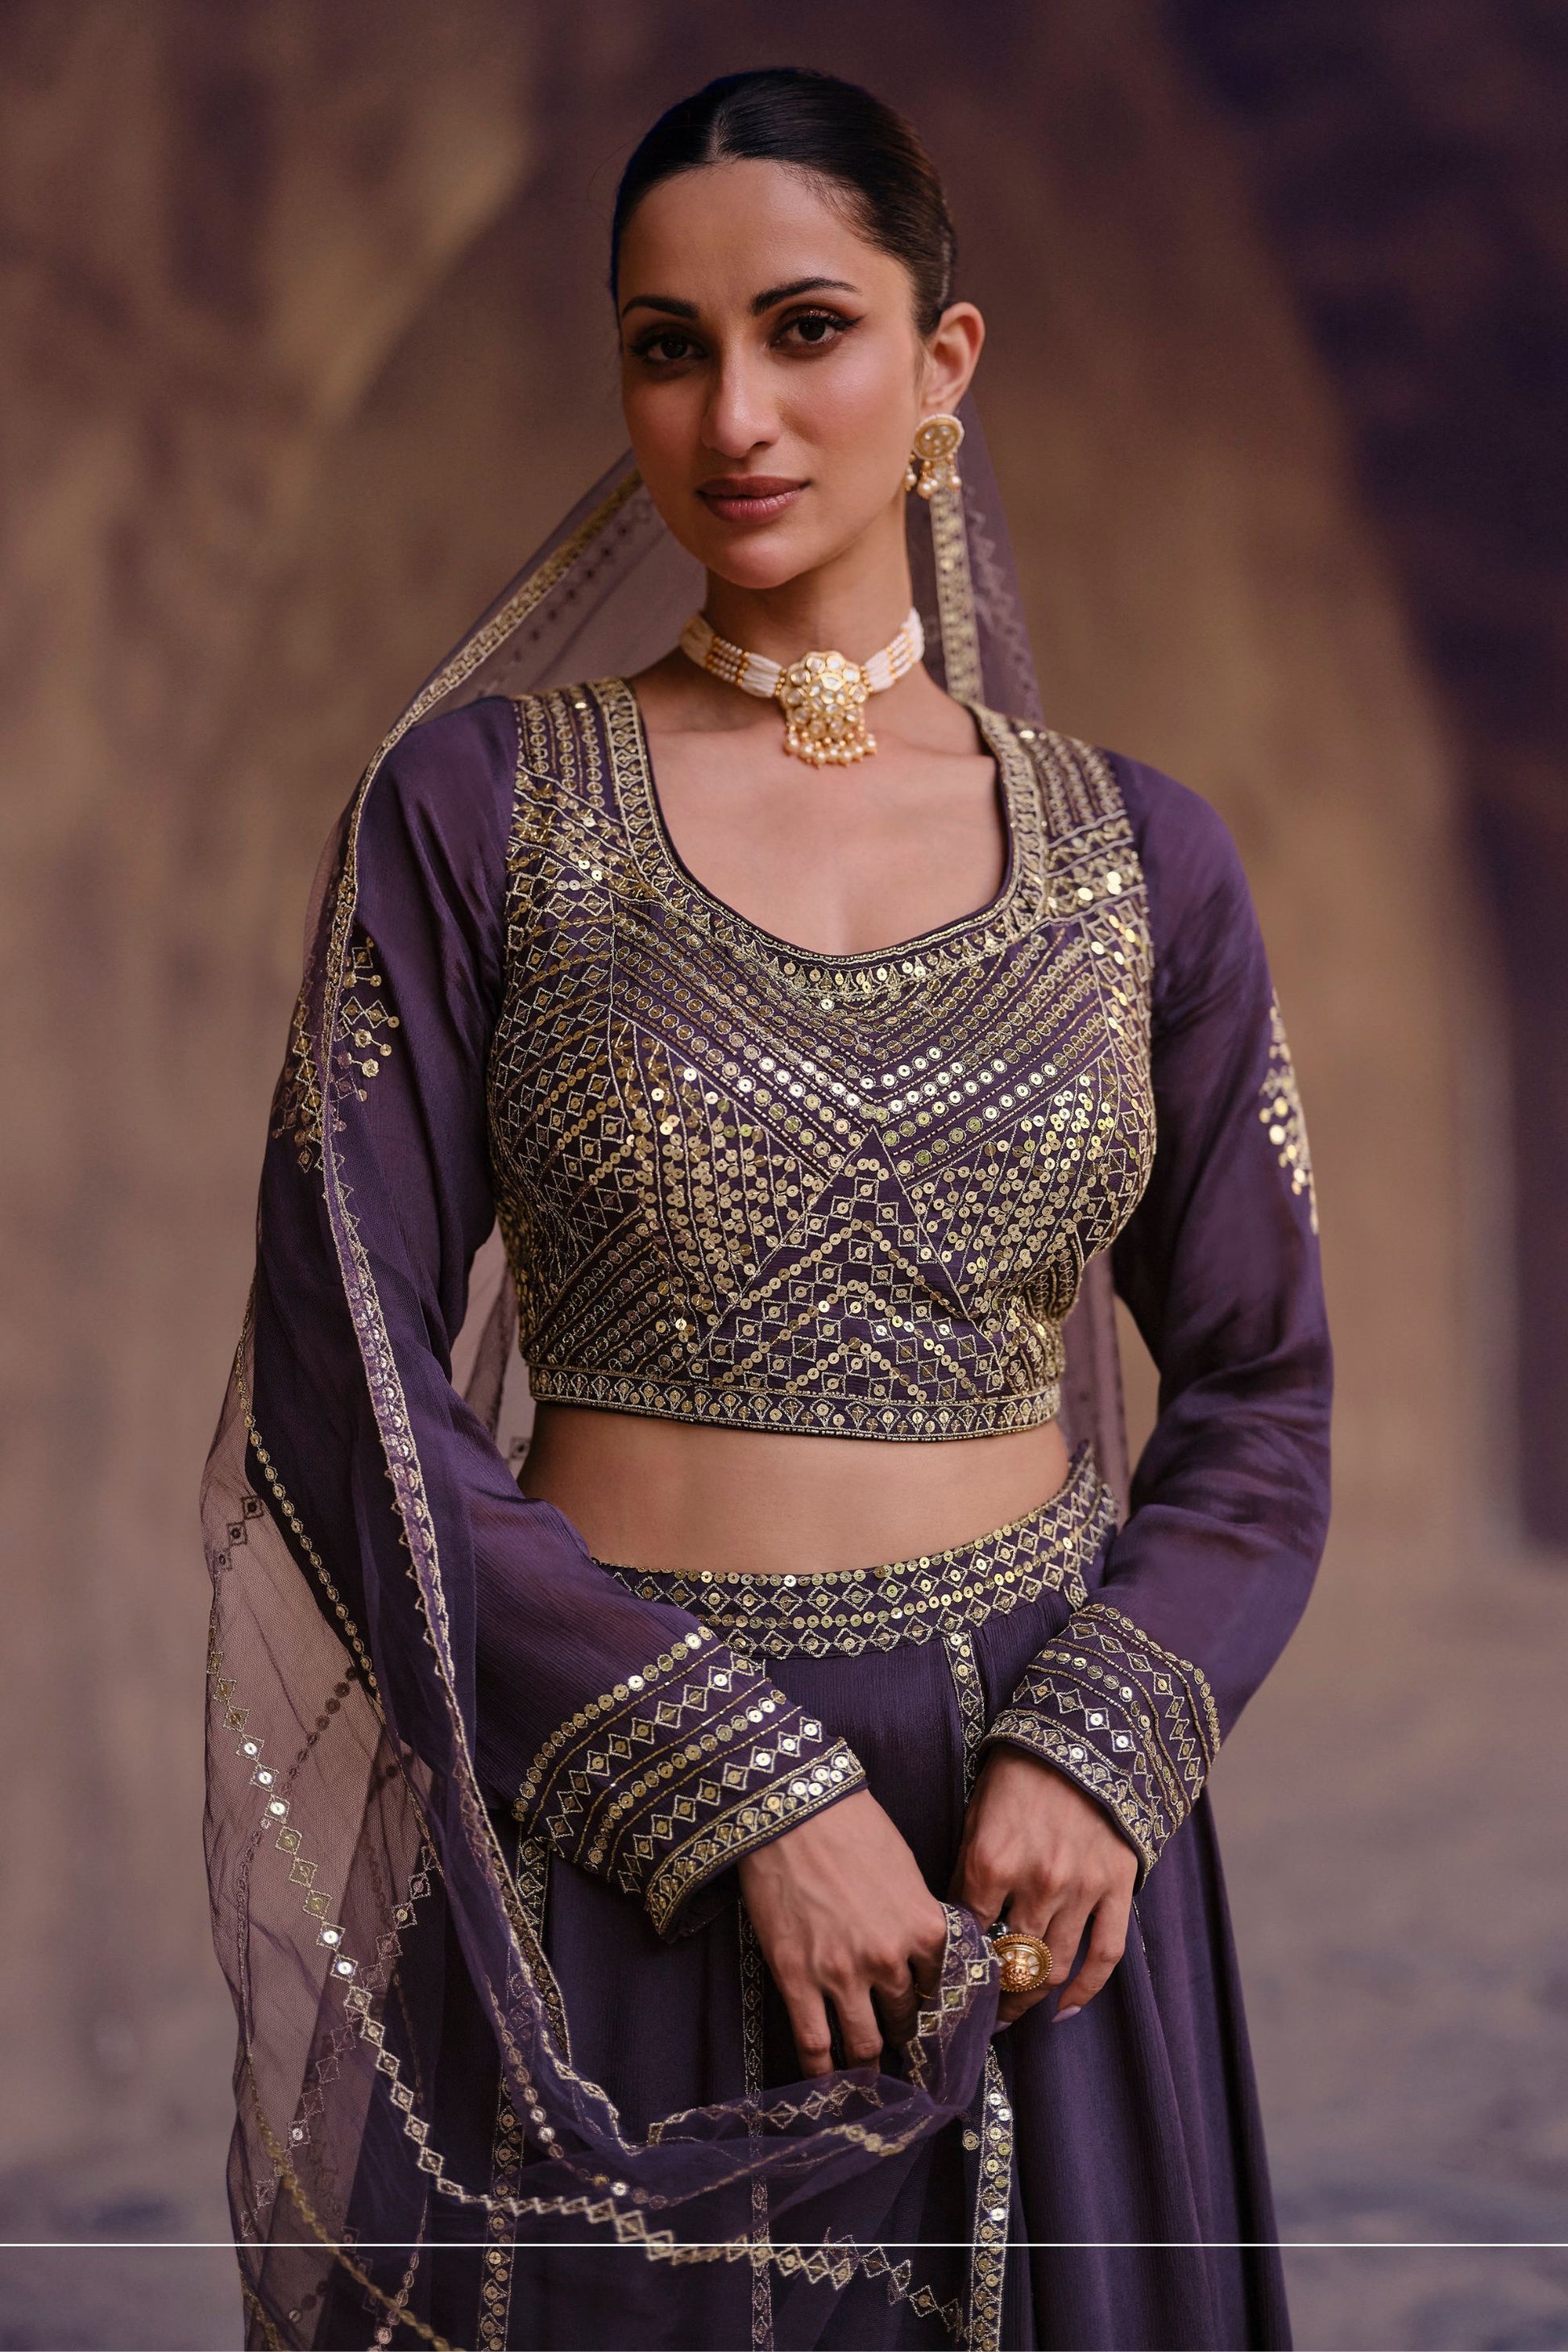 Purple Chinon Silk Lehenga Choli For Indian Festivals & Weddings - Embroidery Work, Sequence Embroidery Work